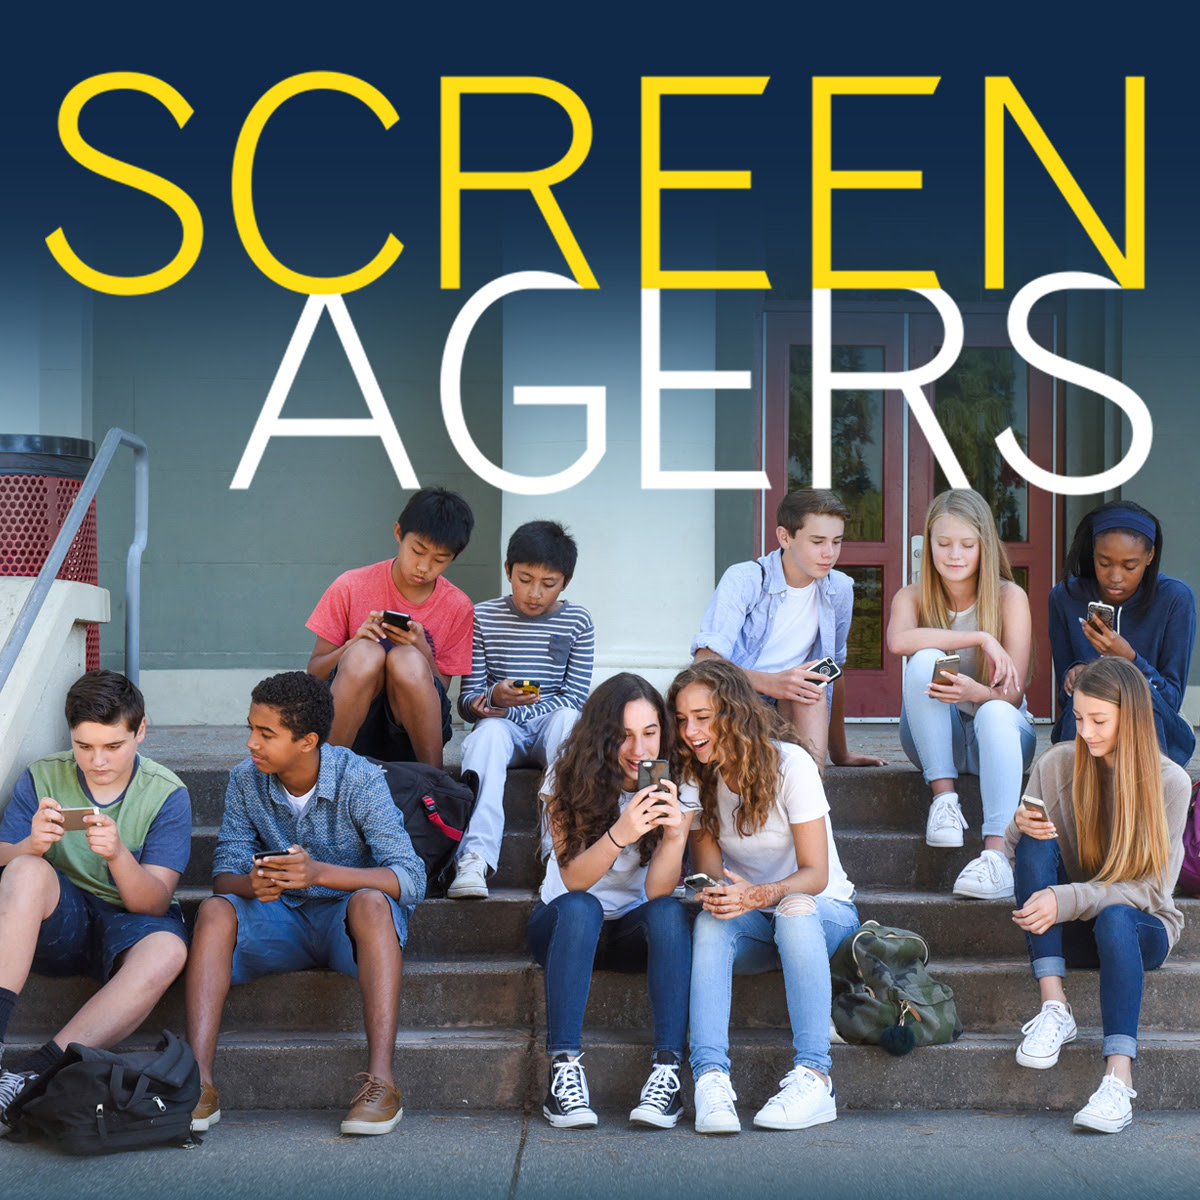 Screenagers Film Presented By PCCS